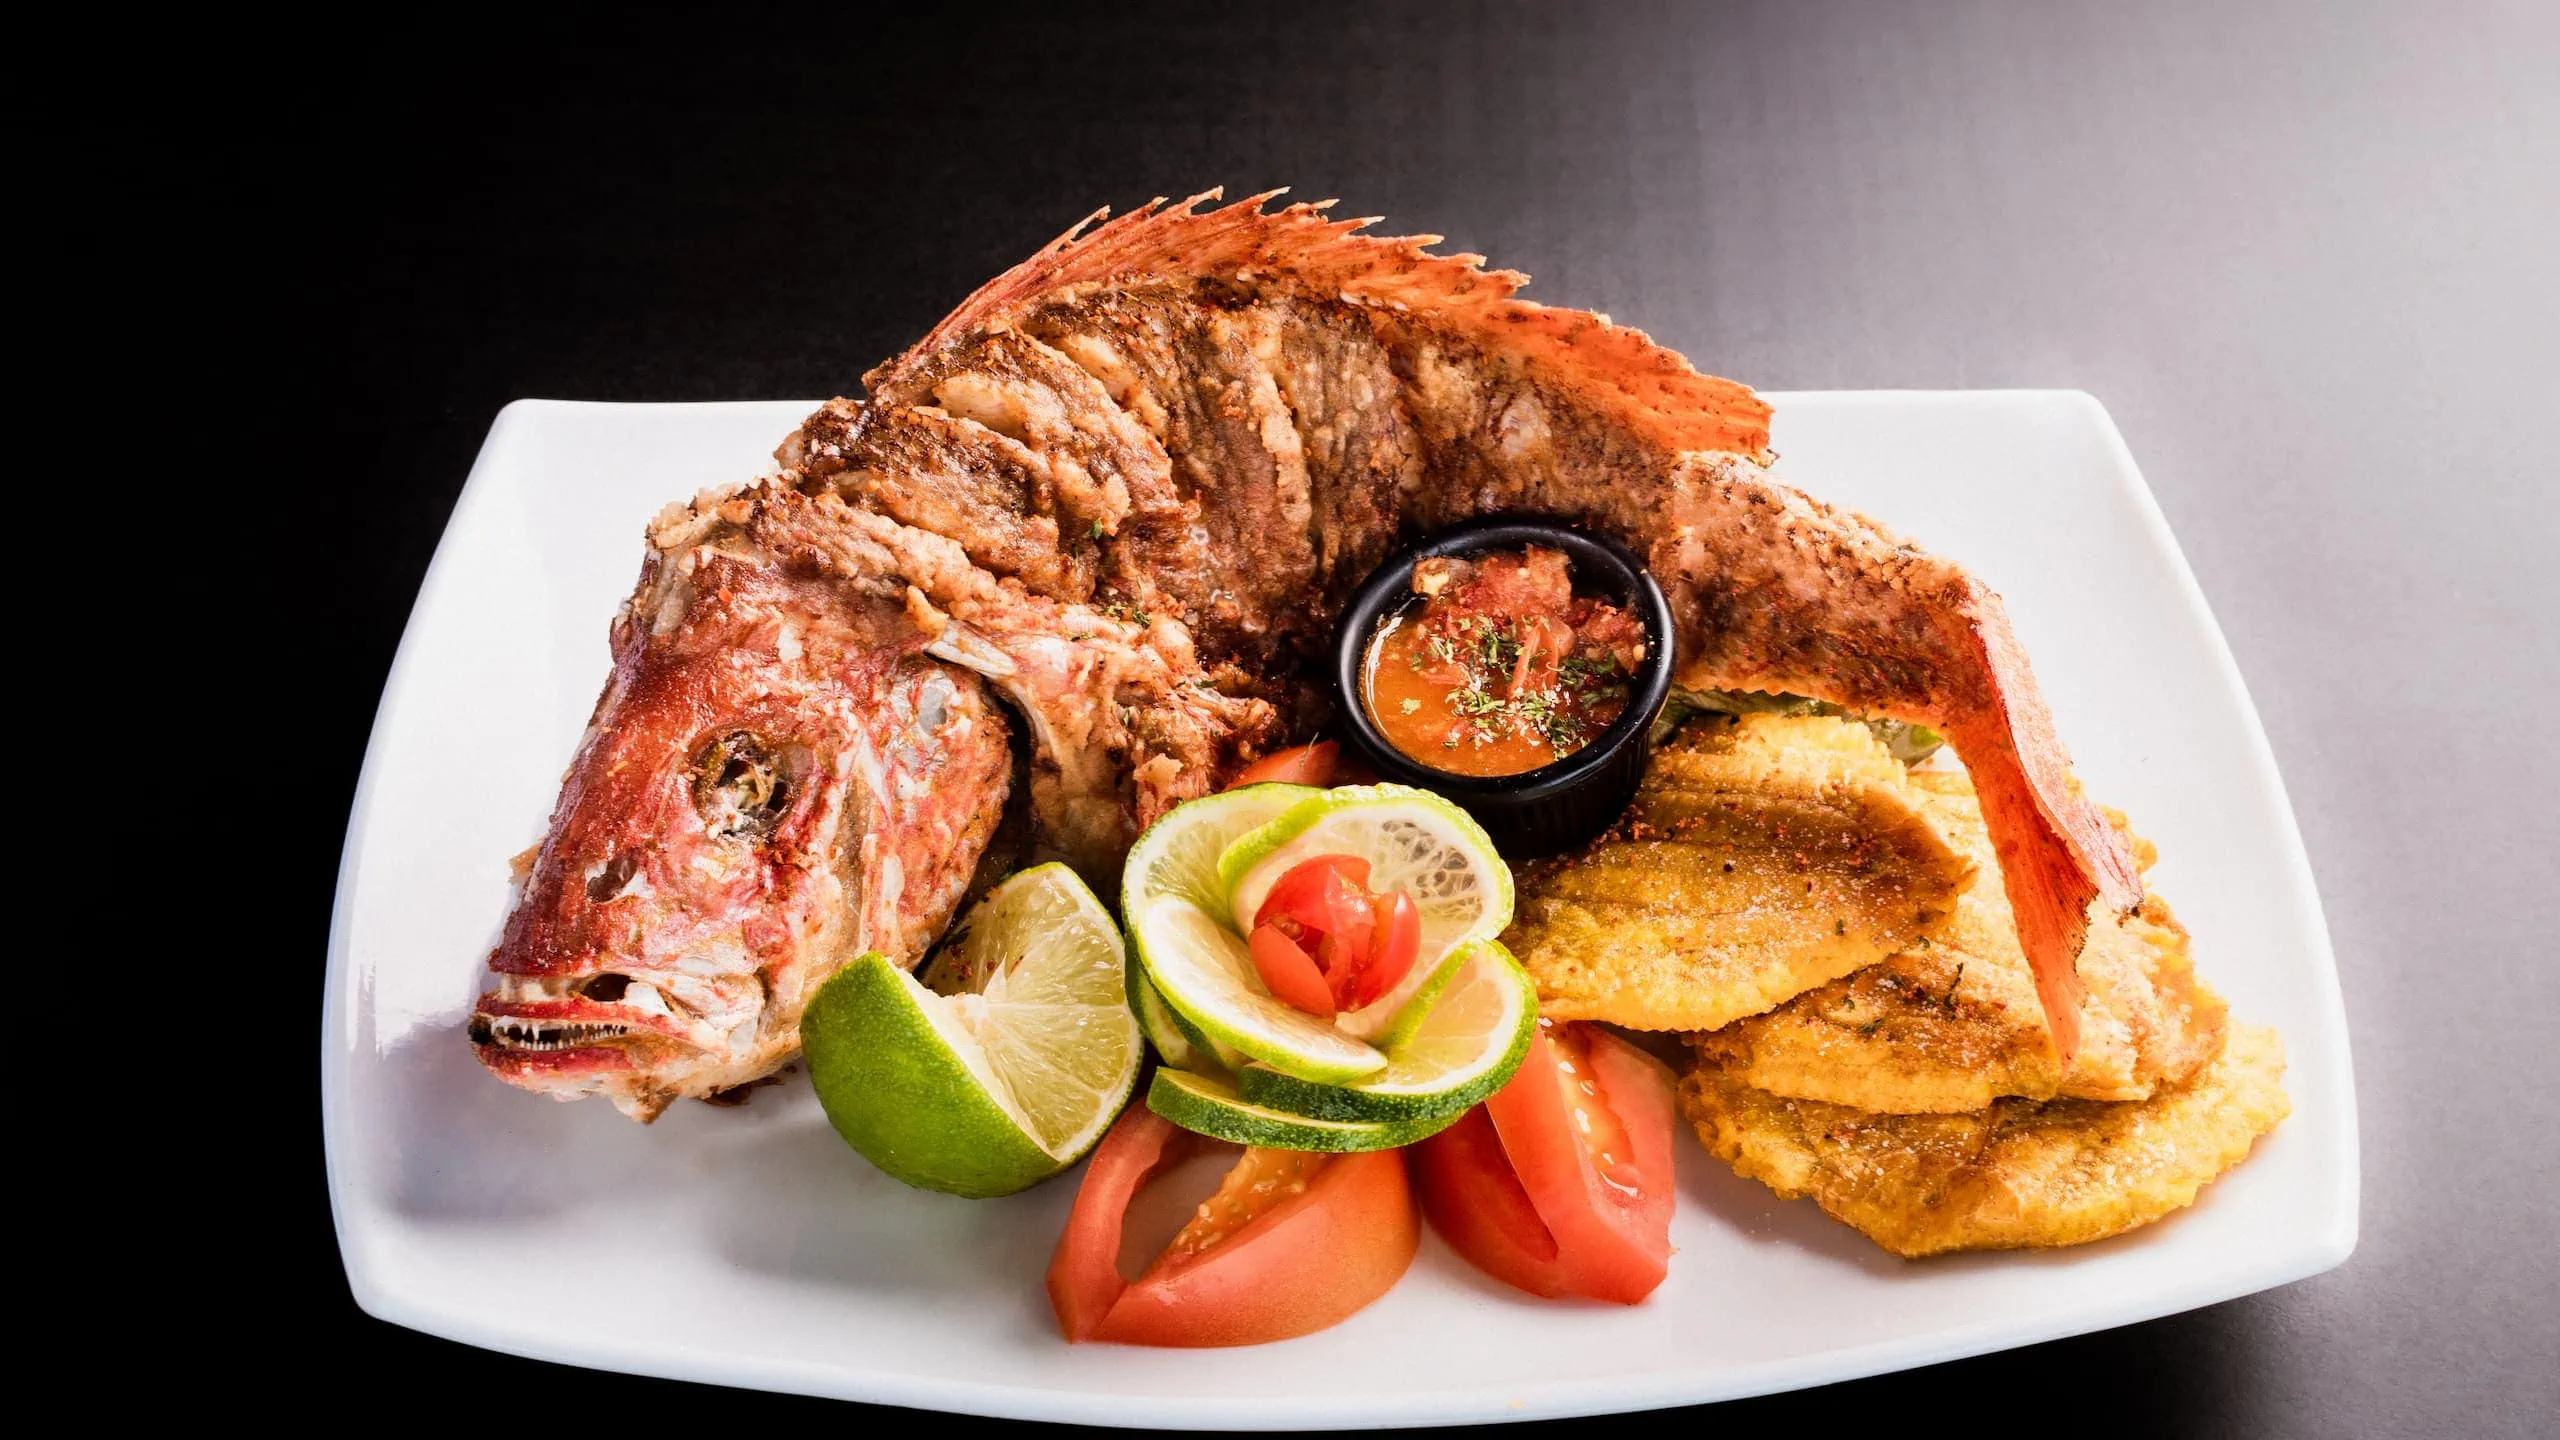 Our fried whole mangrove snapper recipe